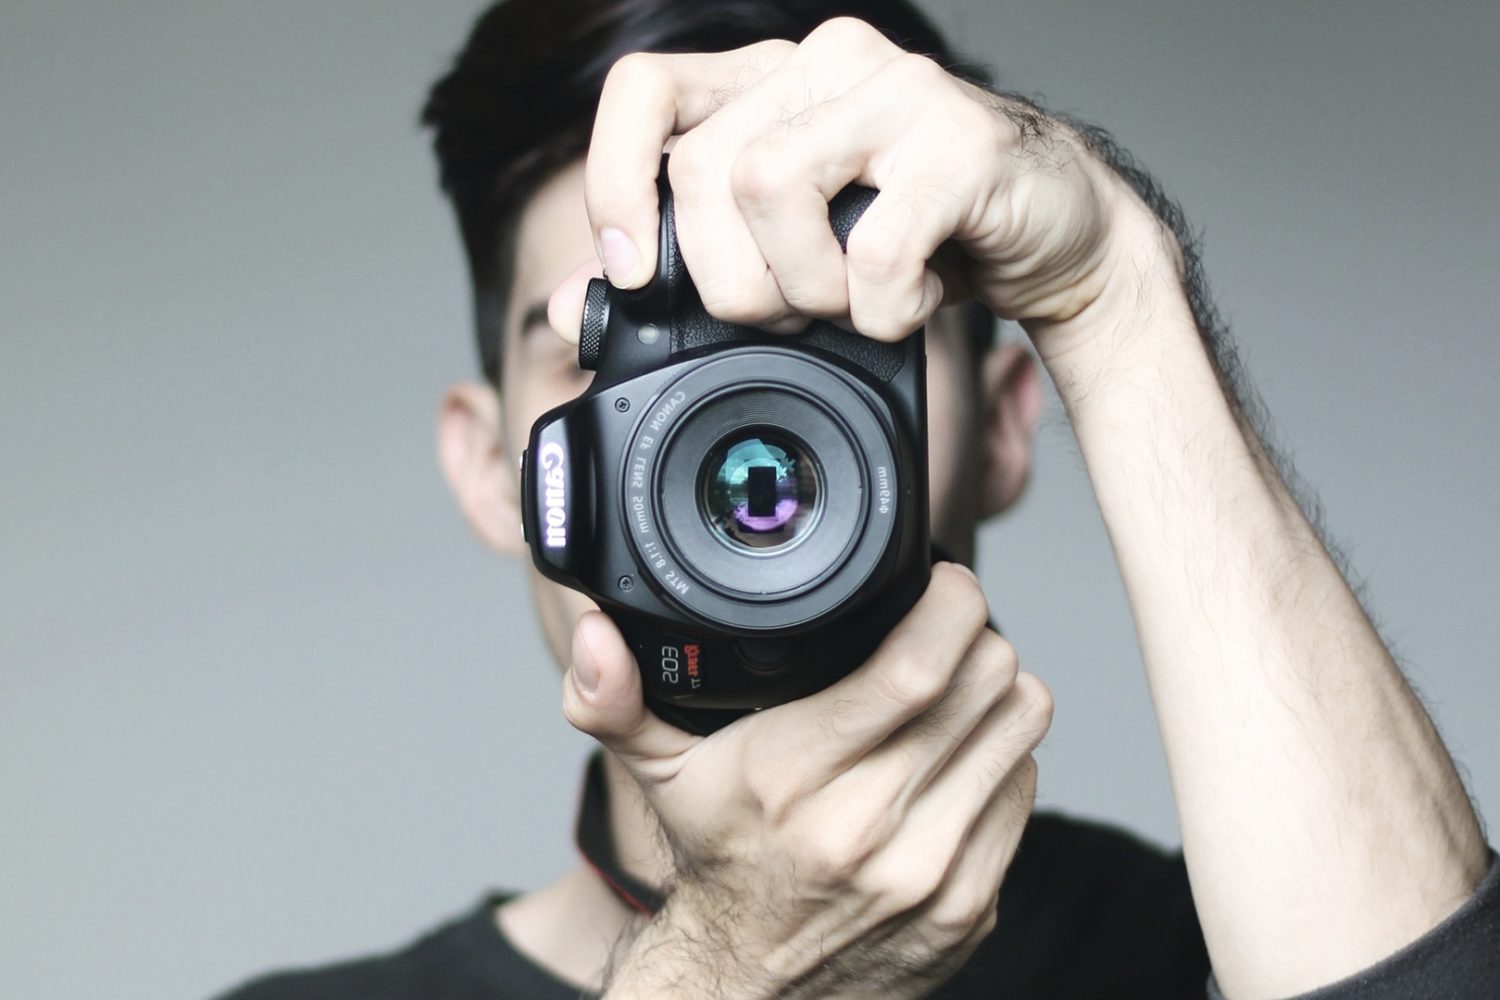 The best gifts for photographers, according to the pros